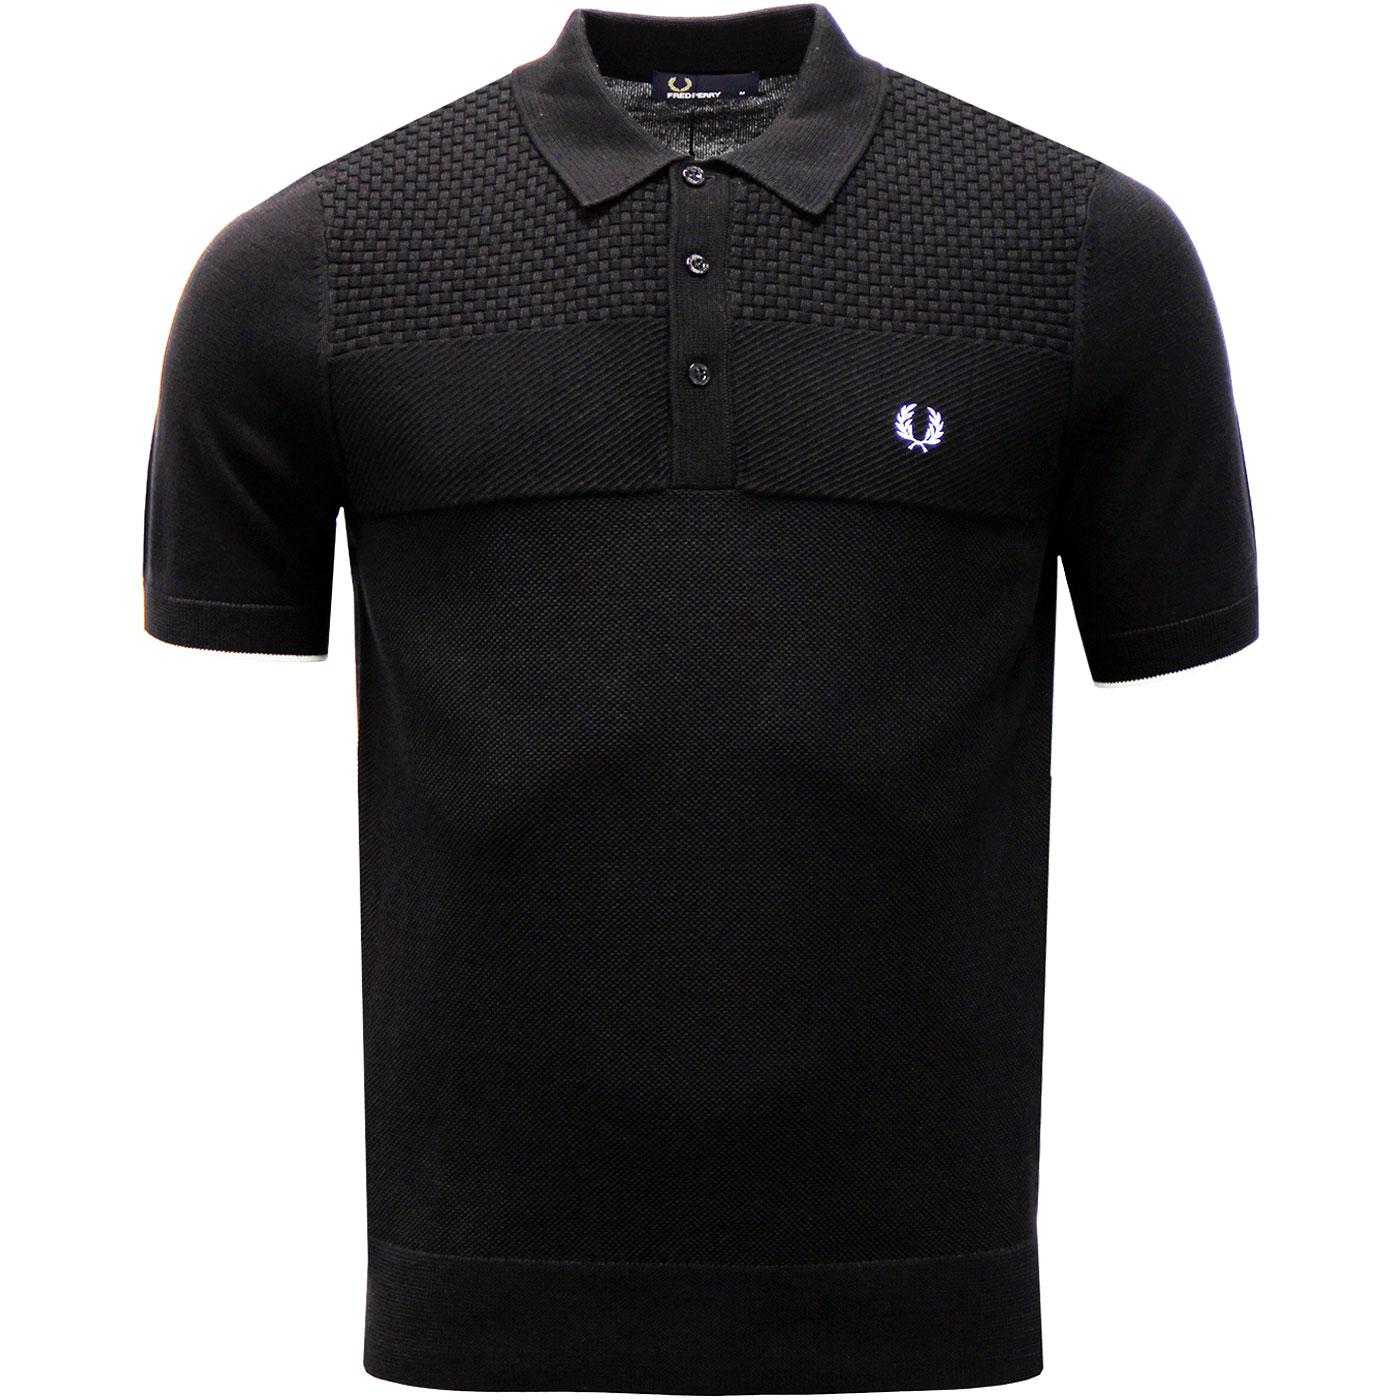 FRED PERRY Men's Mod Texture Knit Panel Polo Shirt